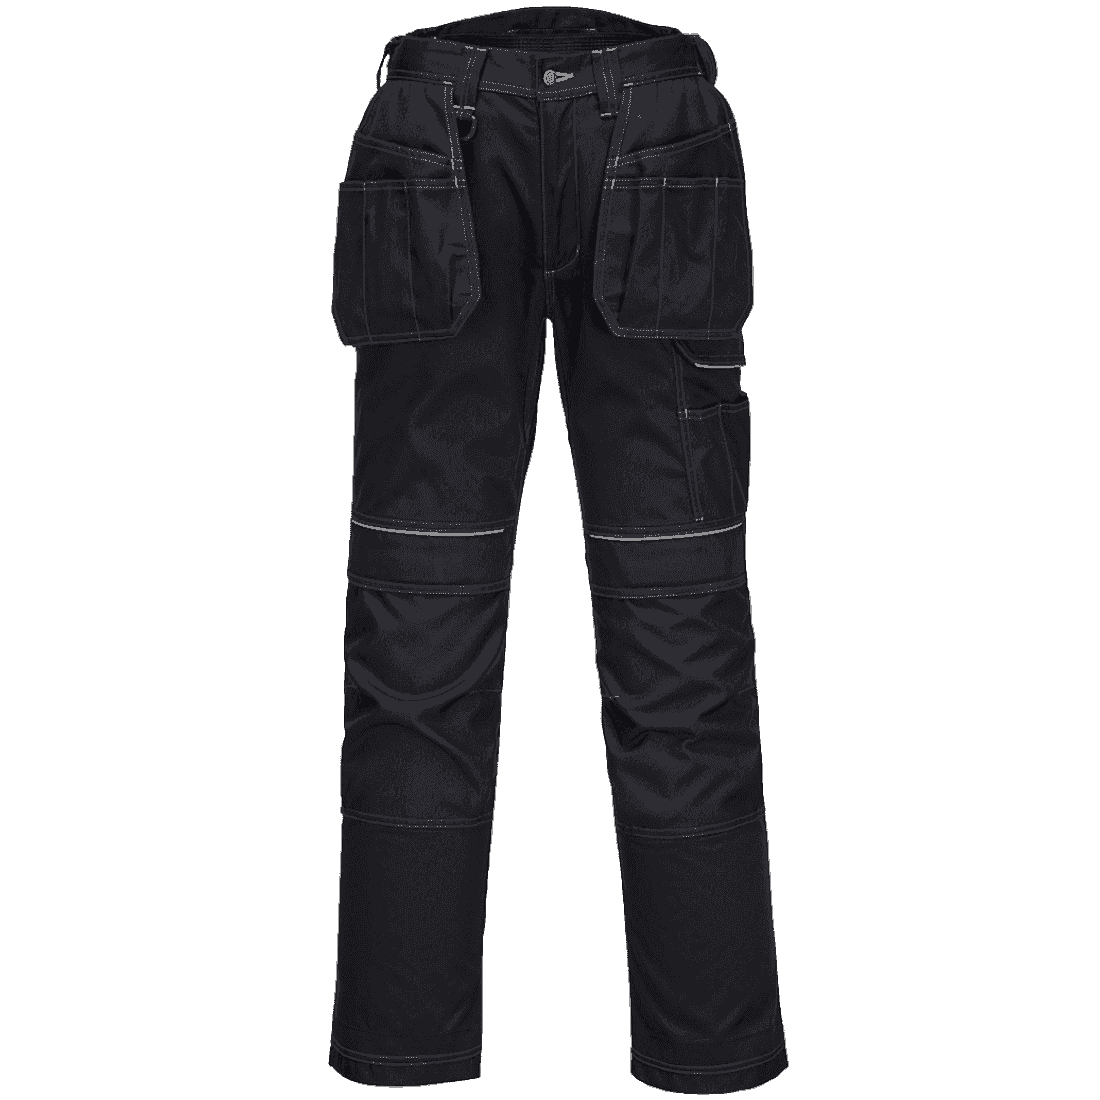 Holster Pocket Work Trousers T602 PW3 Black